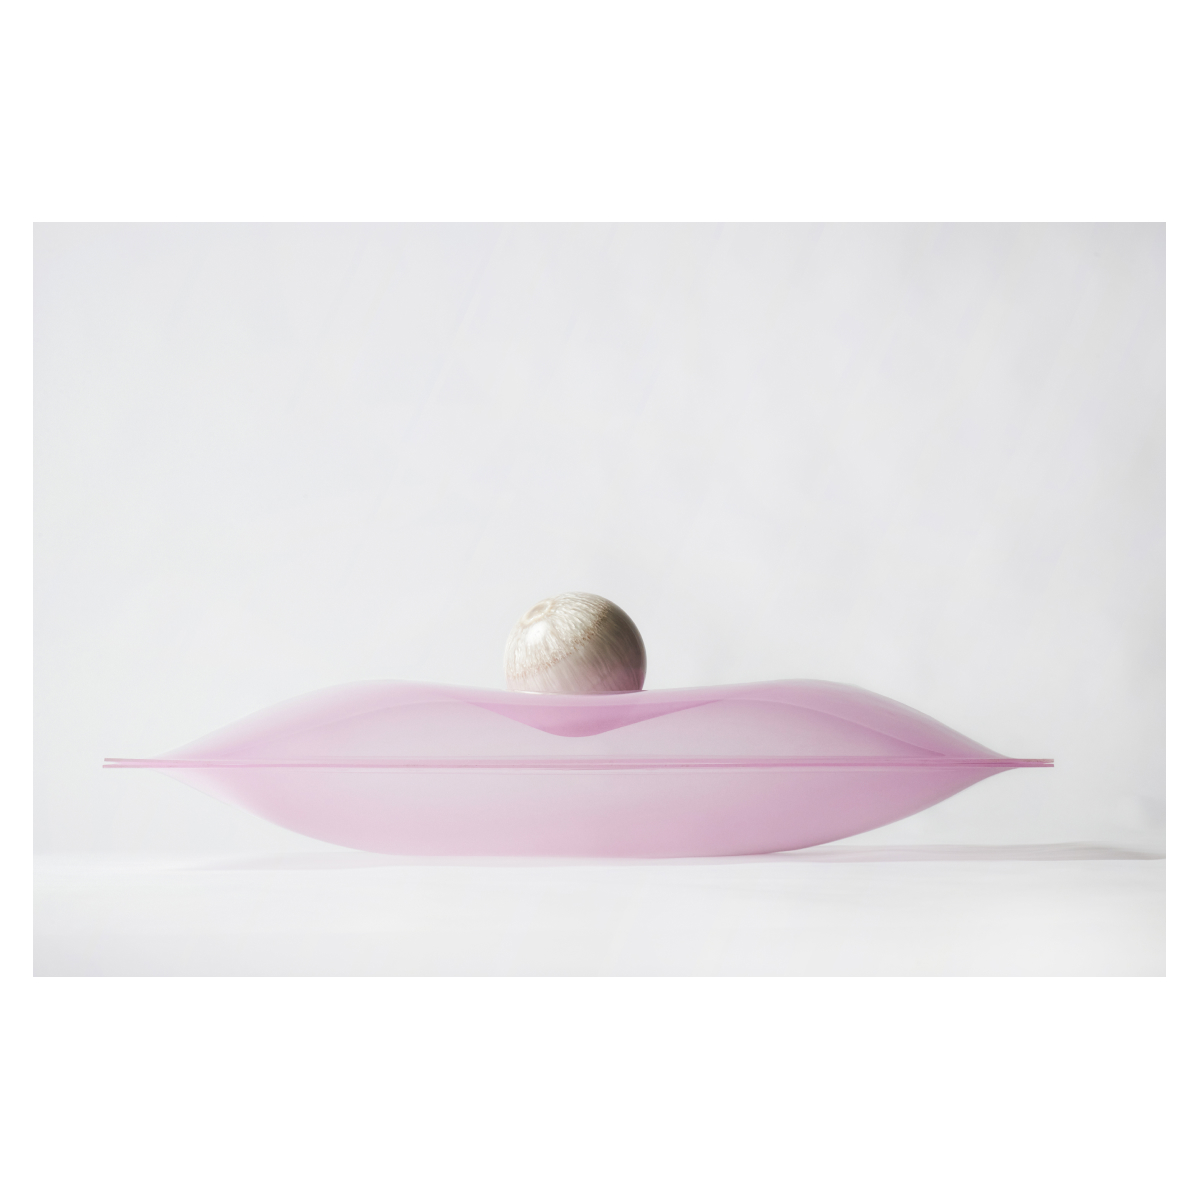 Two light pink semi transparent skylight domes are back to back creating a pillow shape that holds a pearlescent and cream colored bowling ball..